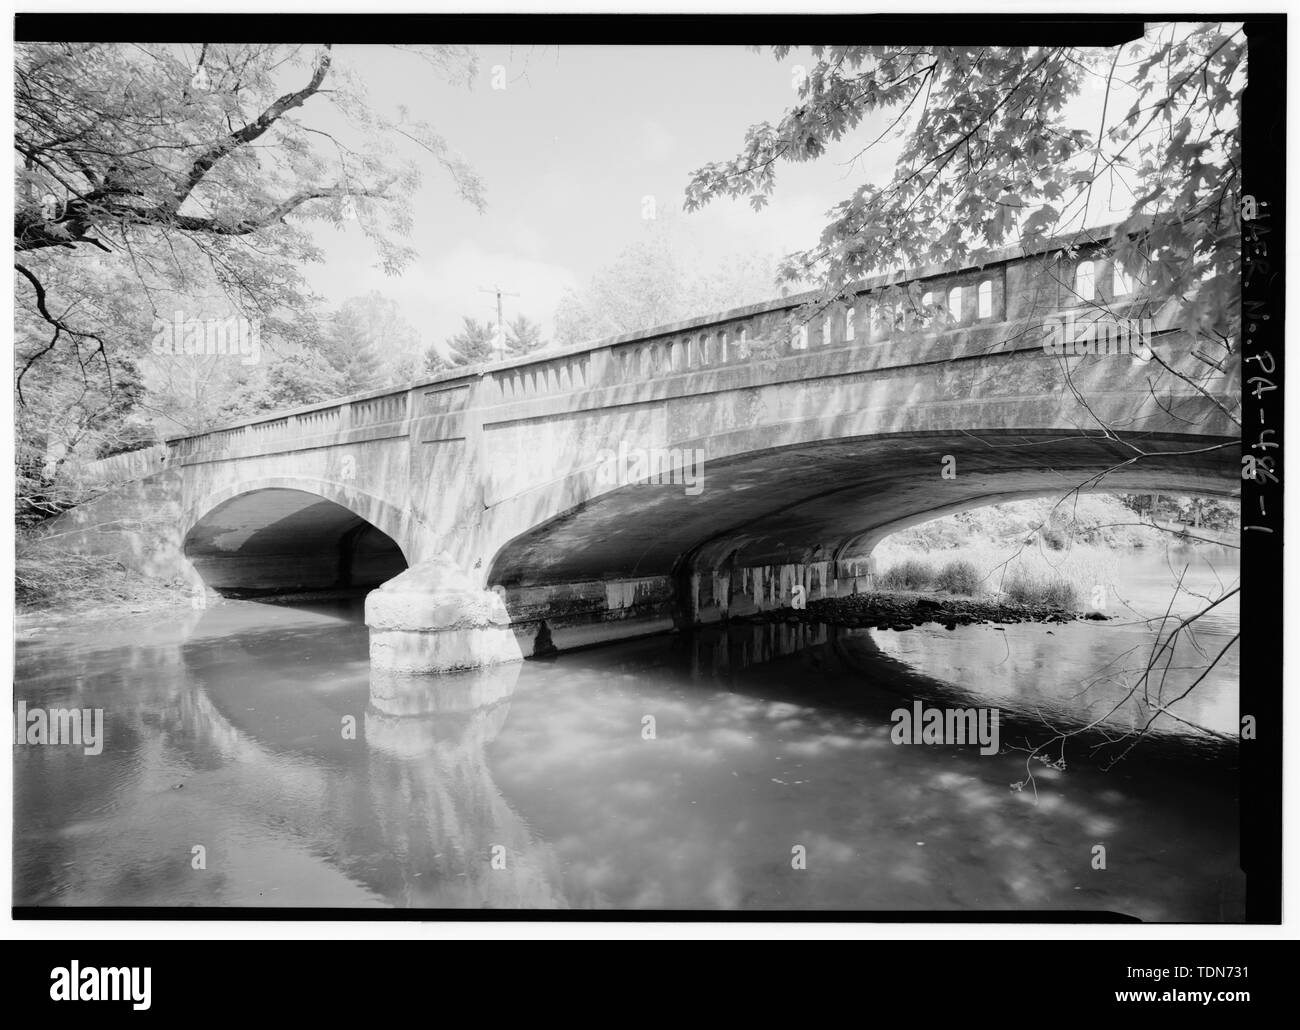 Perspective, looking N.W. - Little Conewago Creek Bridge, Spanning South Branch of Conewago Creek at Lincoln Highway (U.S. Route 30), New Oxford, Adams County, PA; Williams, Charles A; Wagman, George A; Wagman, Fred M; Pennsylvania Department of Highways; DeLony, Eric N, project manager; Pennsylvania Department of Transportation, sponsor; Pennsylvania Historical and Museum Commission, sponsor; Hawley, Haven, historian; Lowe, Jet, photographer Stock Photo